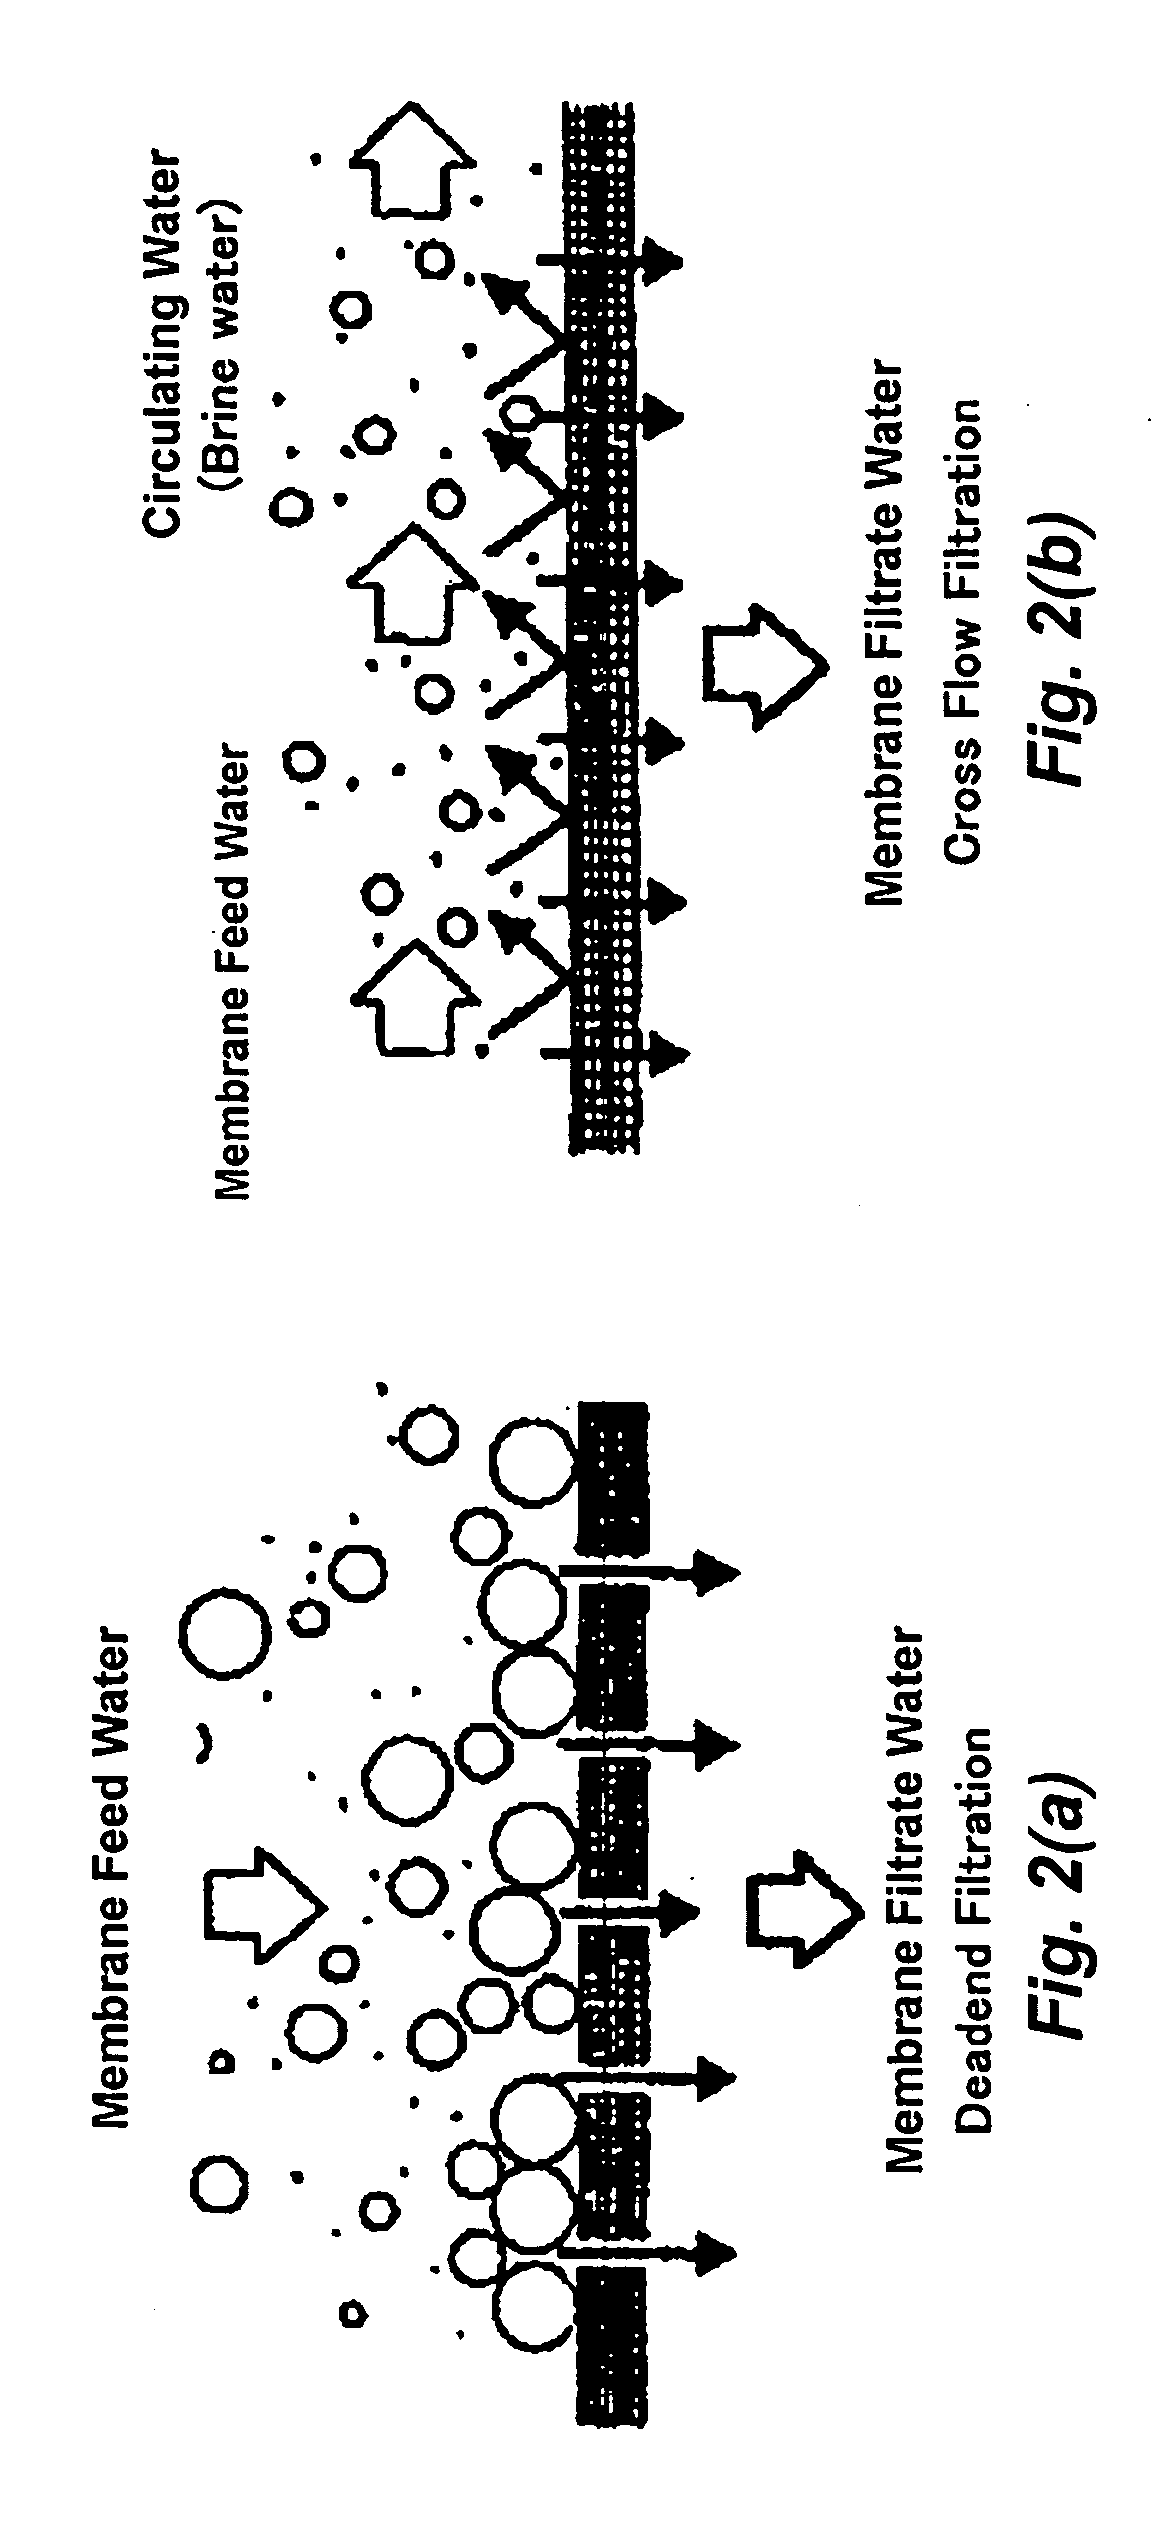 Method of produced water treatment, method of water reuse, and systems for these methods